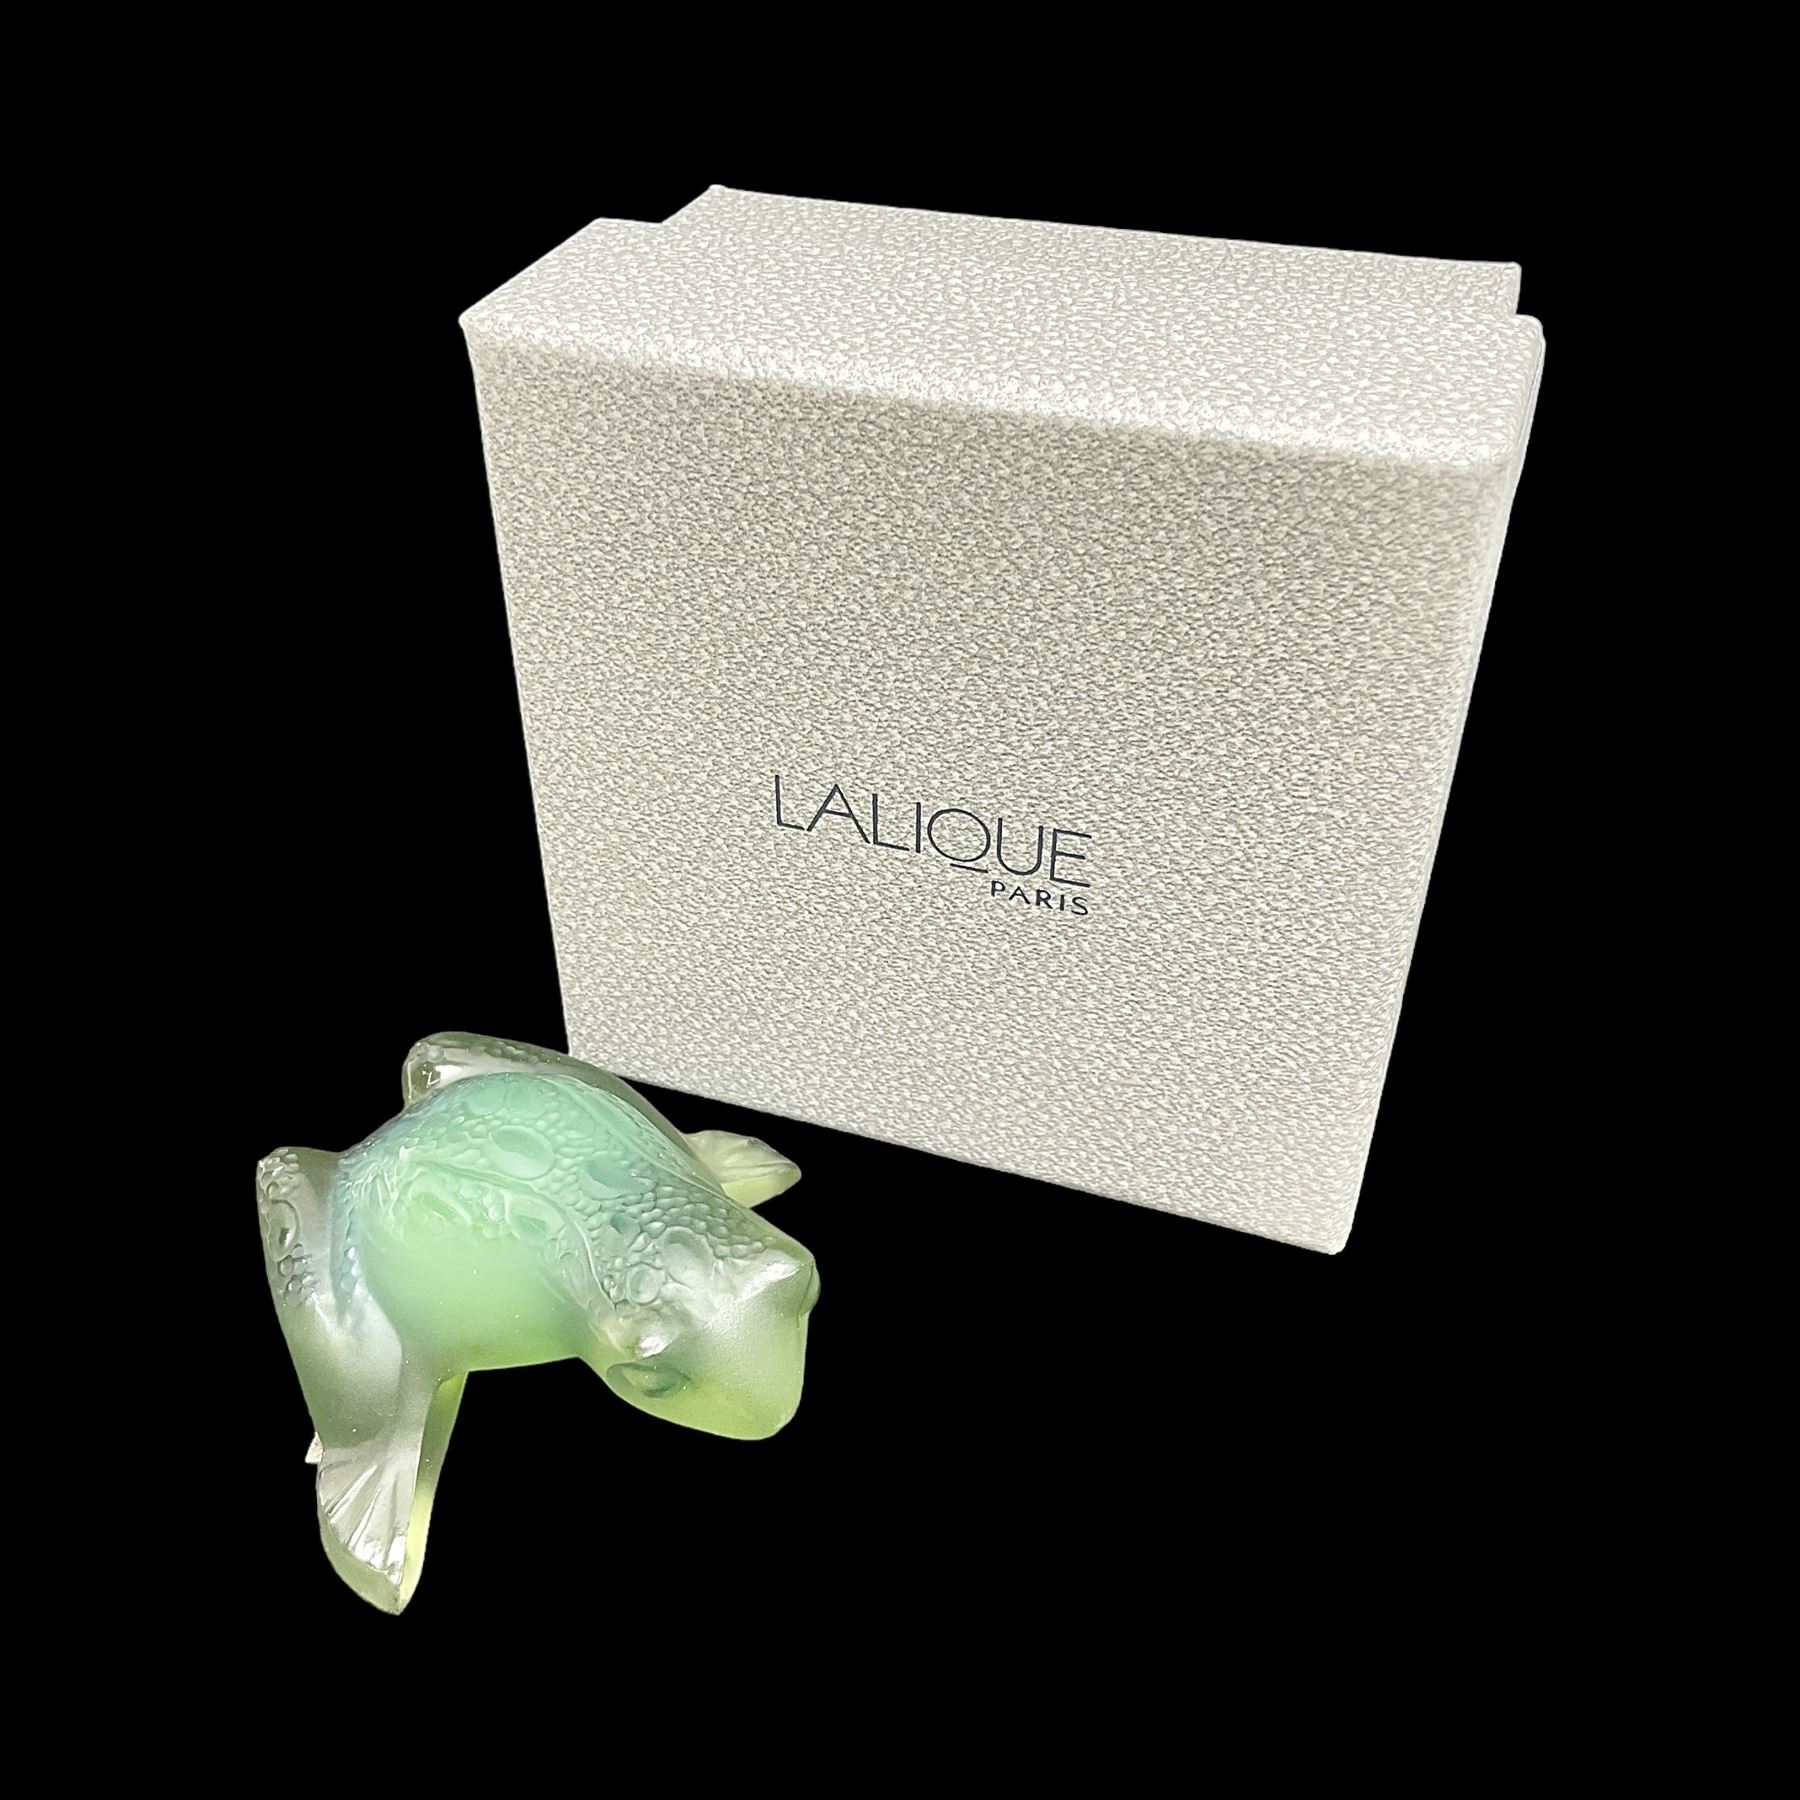 Lalique small green glass frog